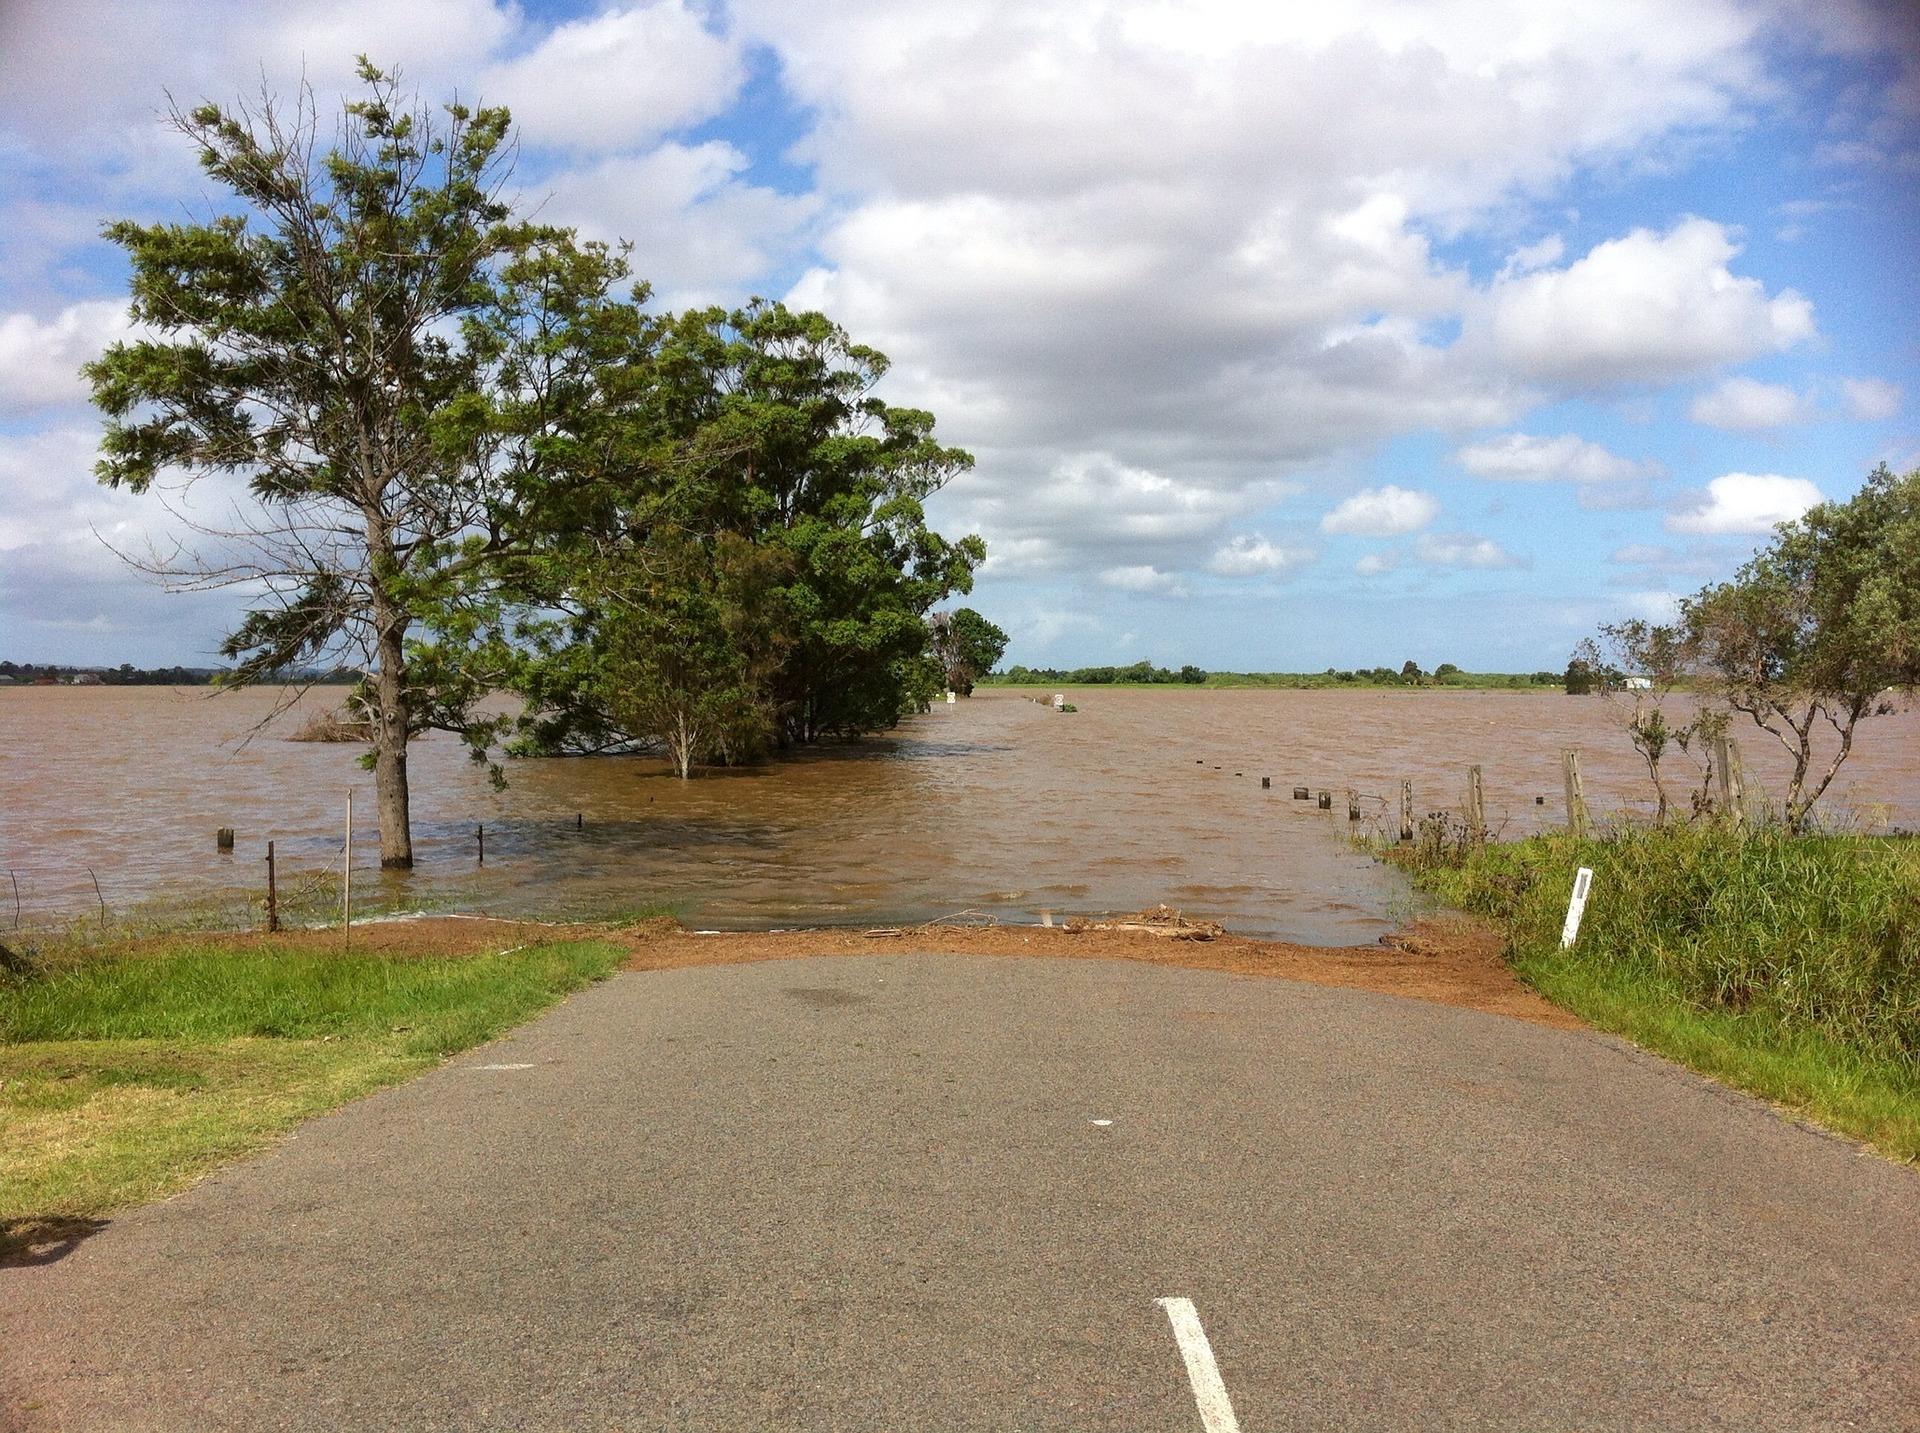 Standing water covering road and fields